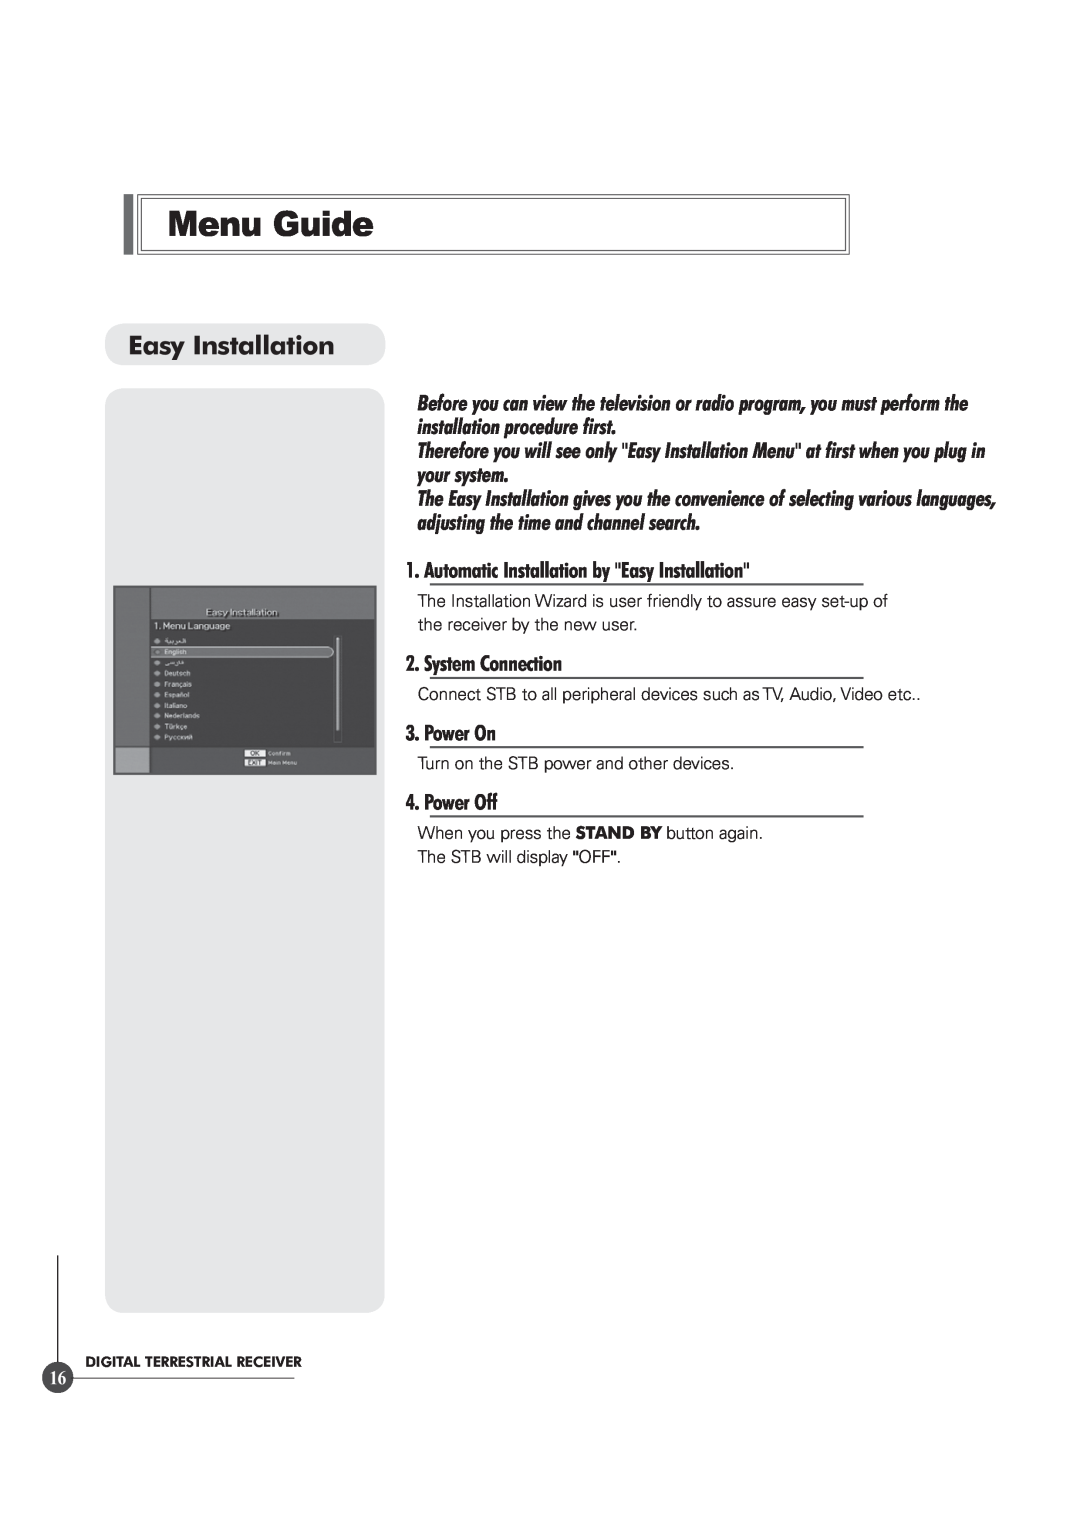 Triax TR 305 manual Menu Guide, Automatic Installation by Easy Installation, System Connection, Power On, Power Off 